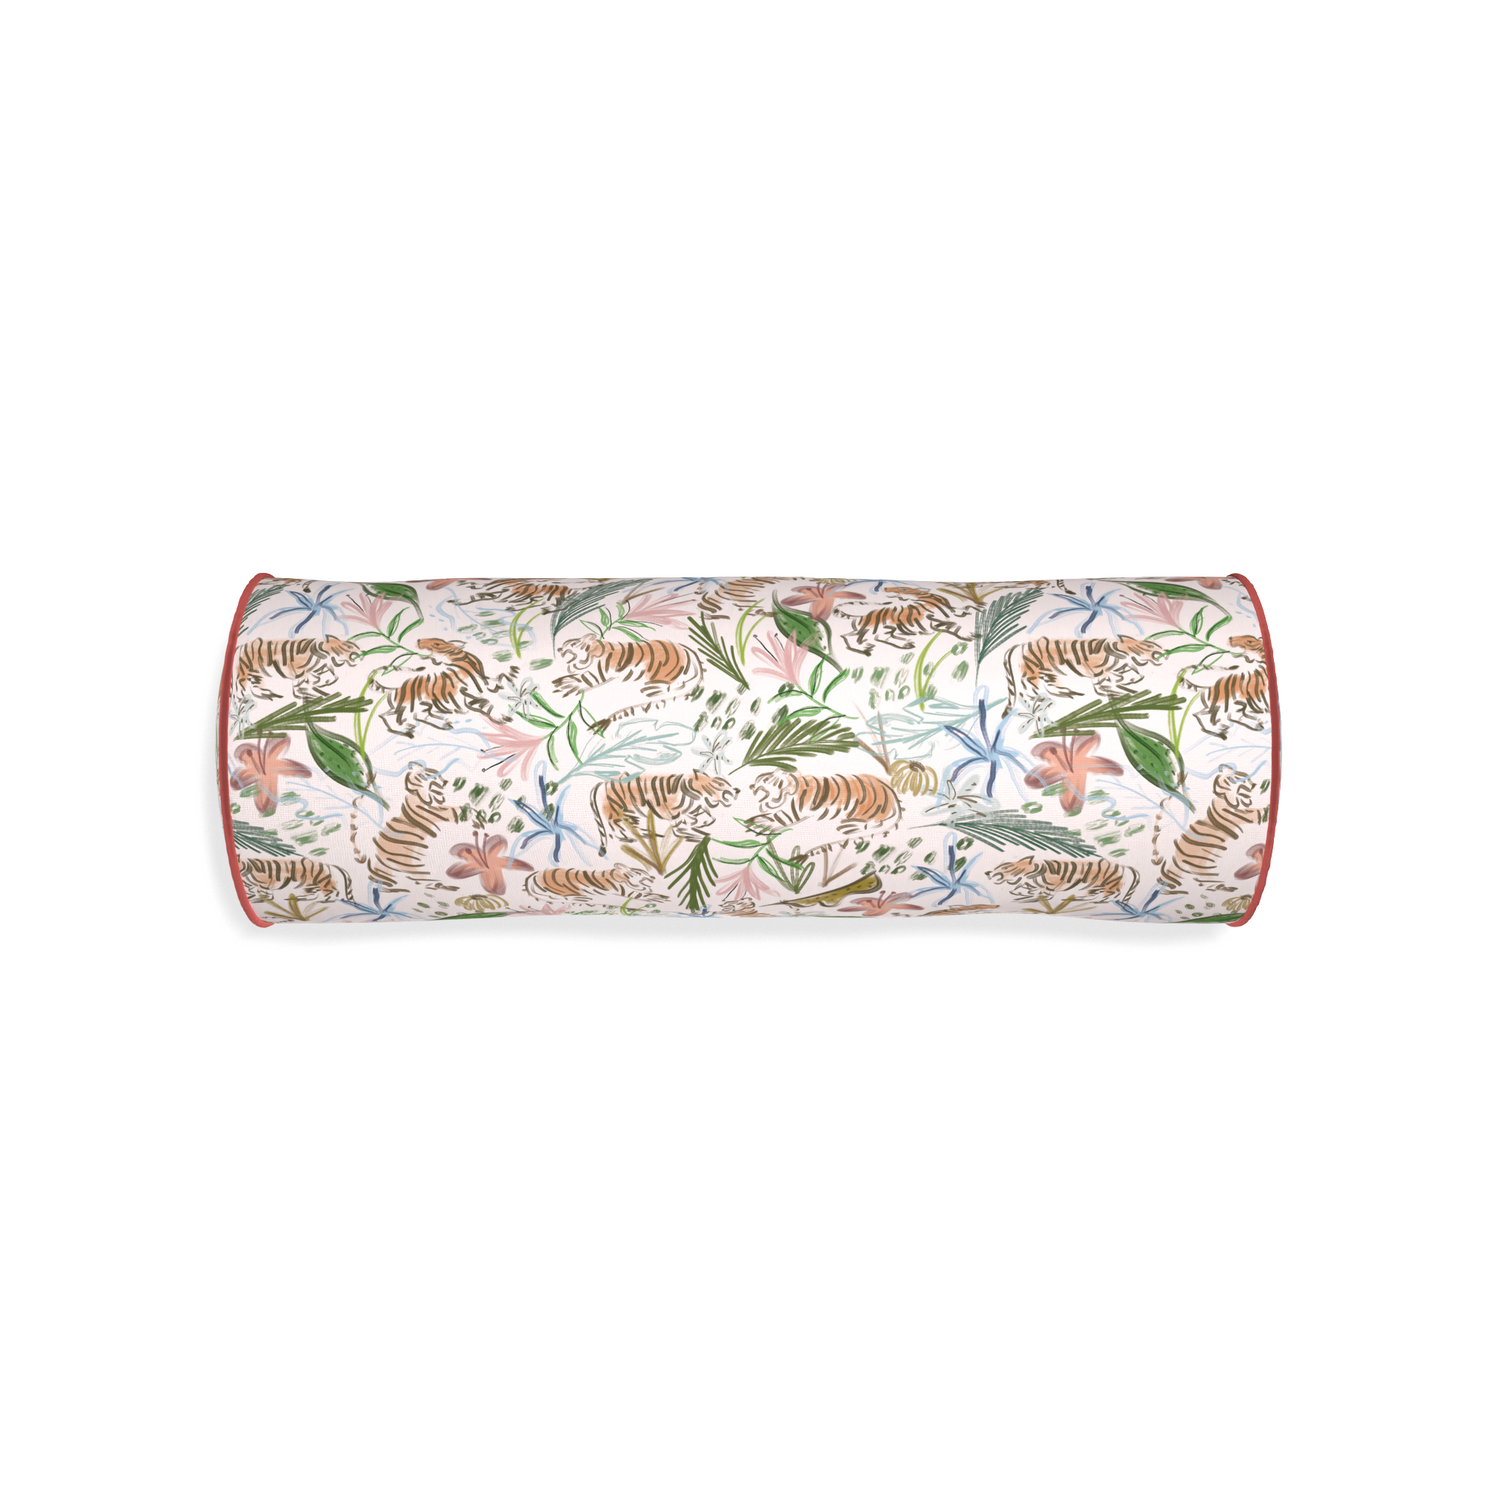 Bolster frida pink custom pink chinoiserie tigerpillow with c piping on white background